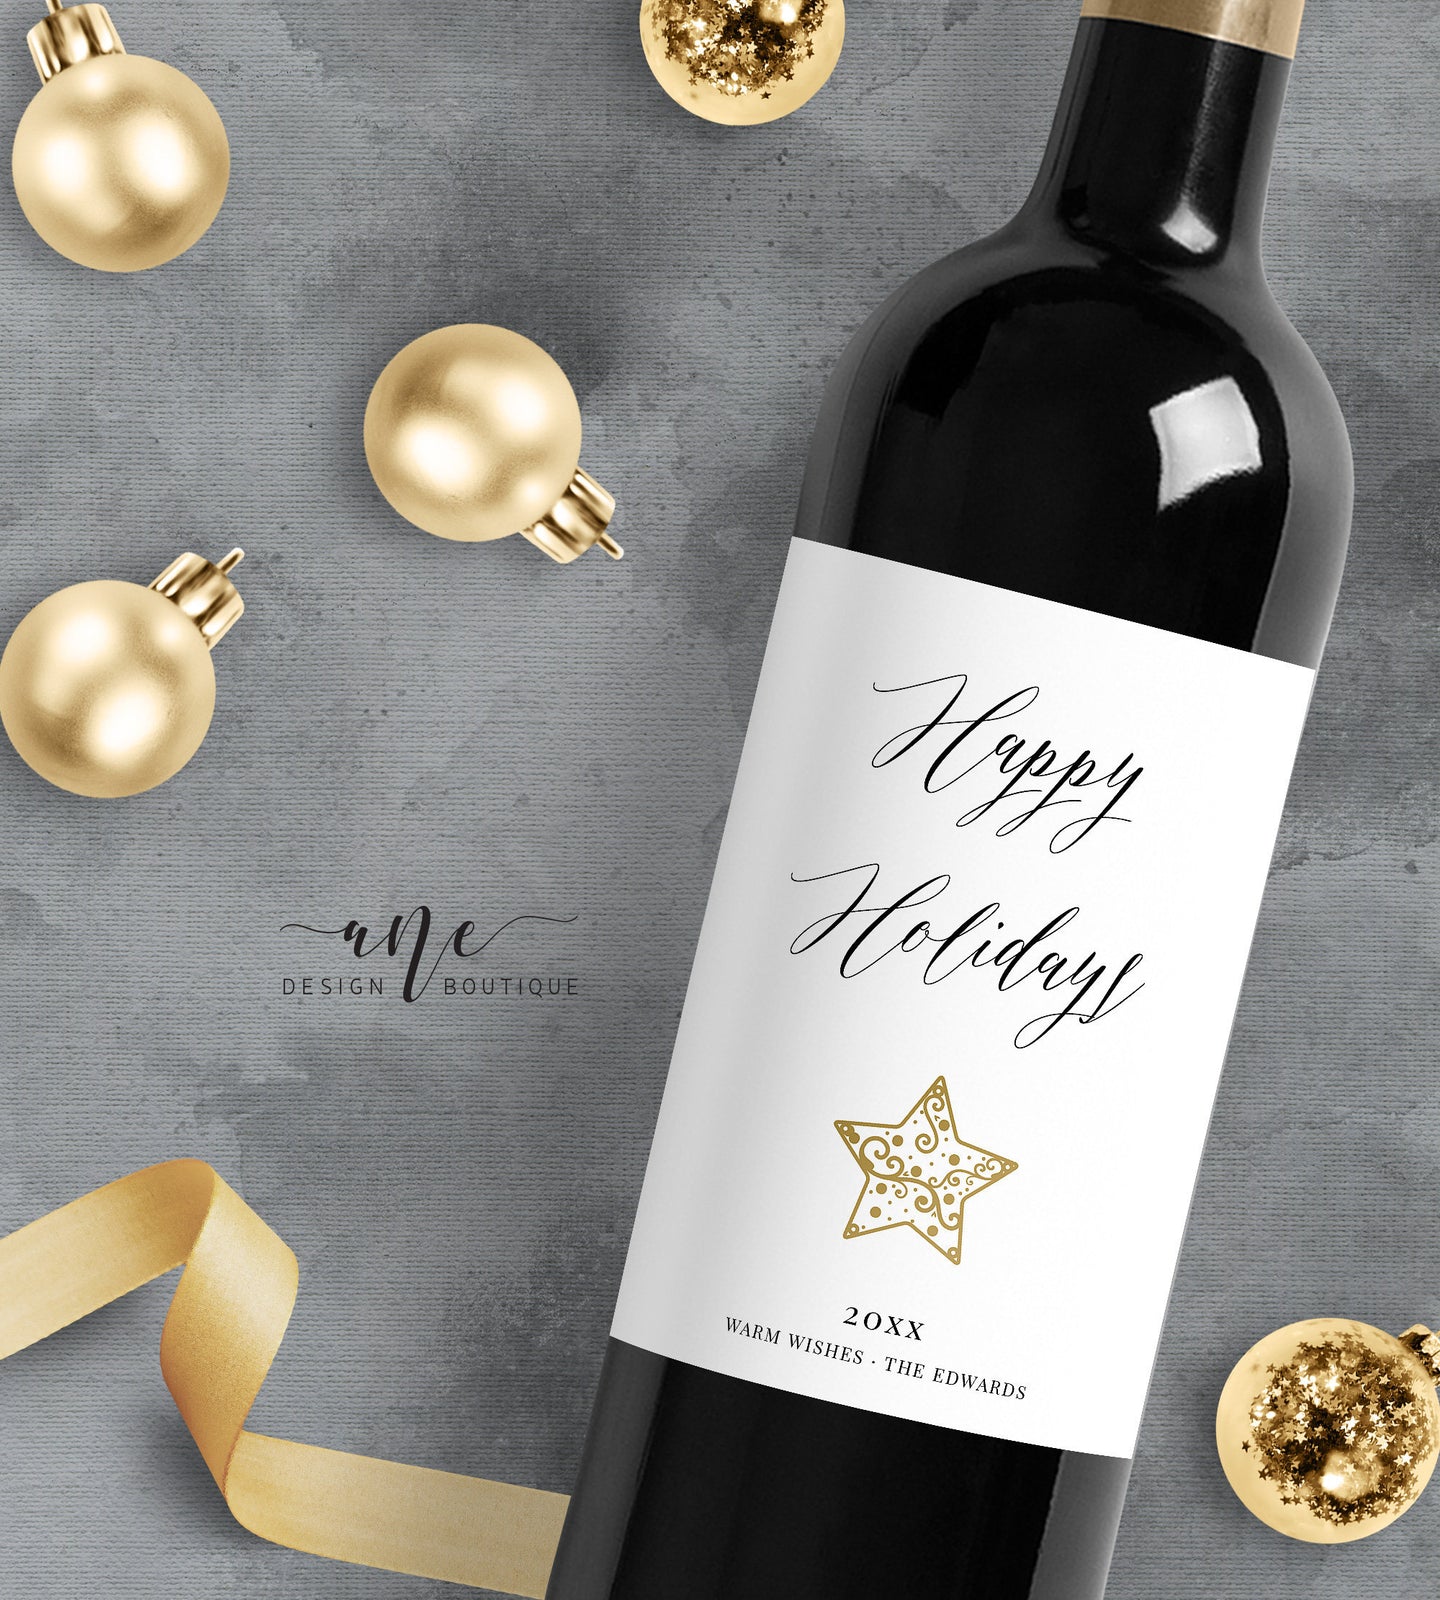 Happy Holidays Wine Label Template, Custom Christmas Gift for Teacher, Alternative to Holiday Card, 100% Editable, Printable Download 012